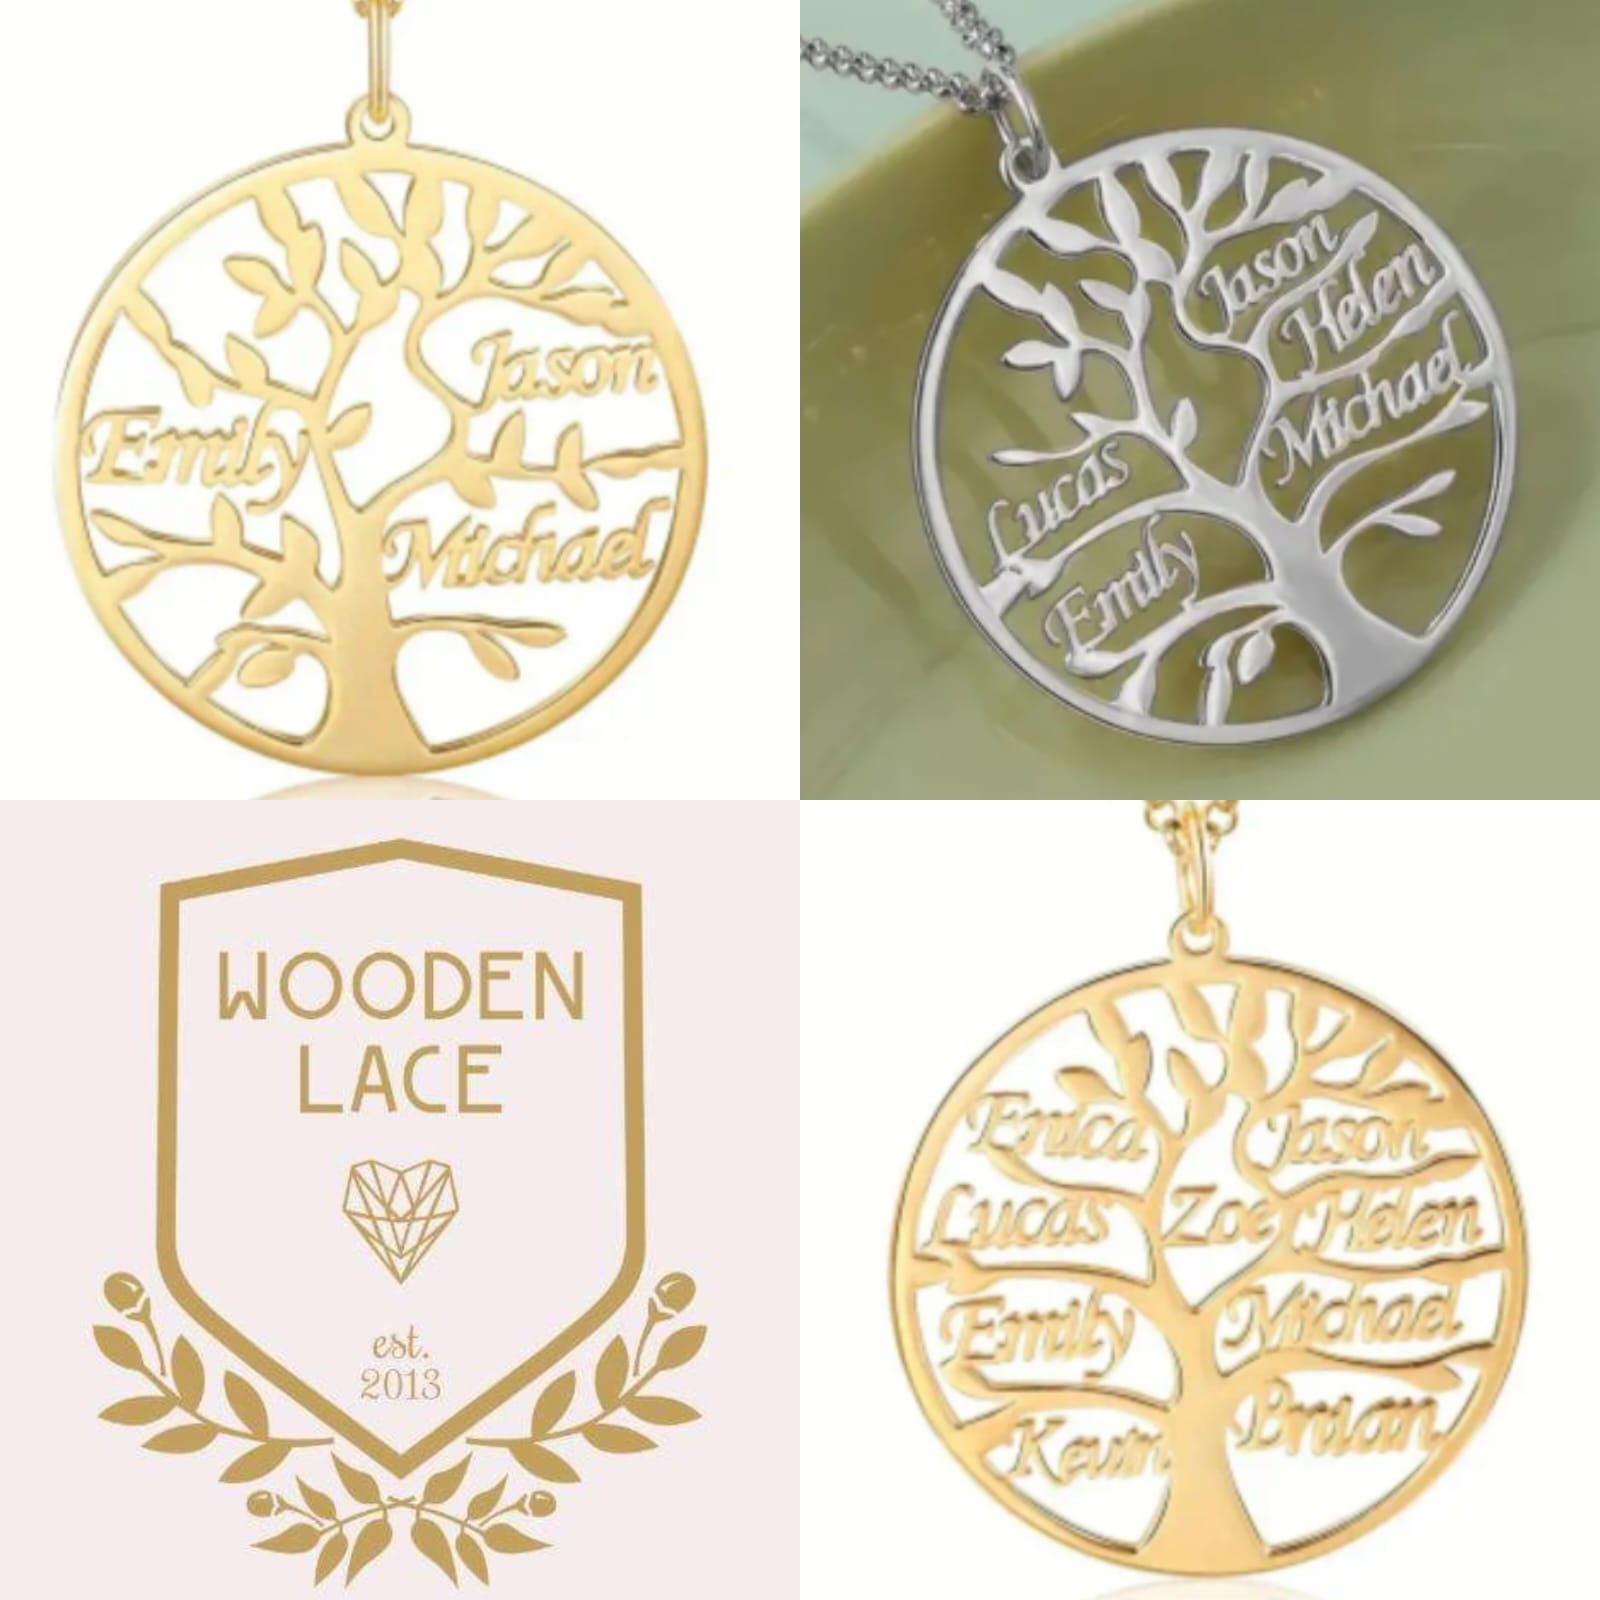 Family tree necklace in silver or gold with up to 9 names inside. From R550 - R1100